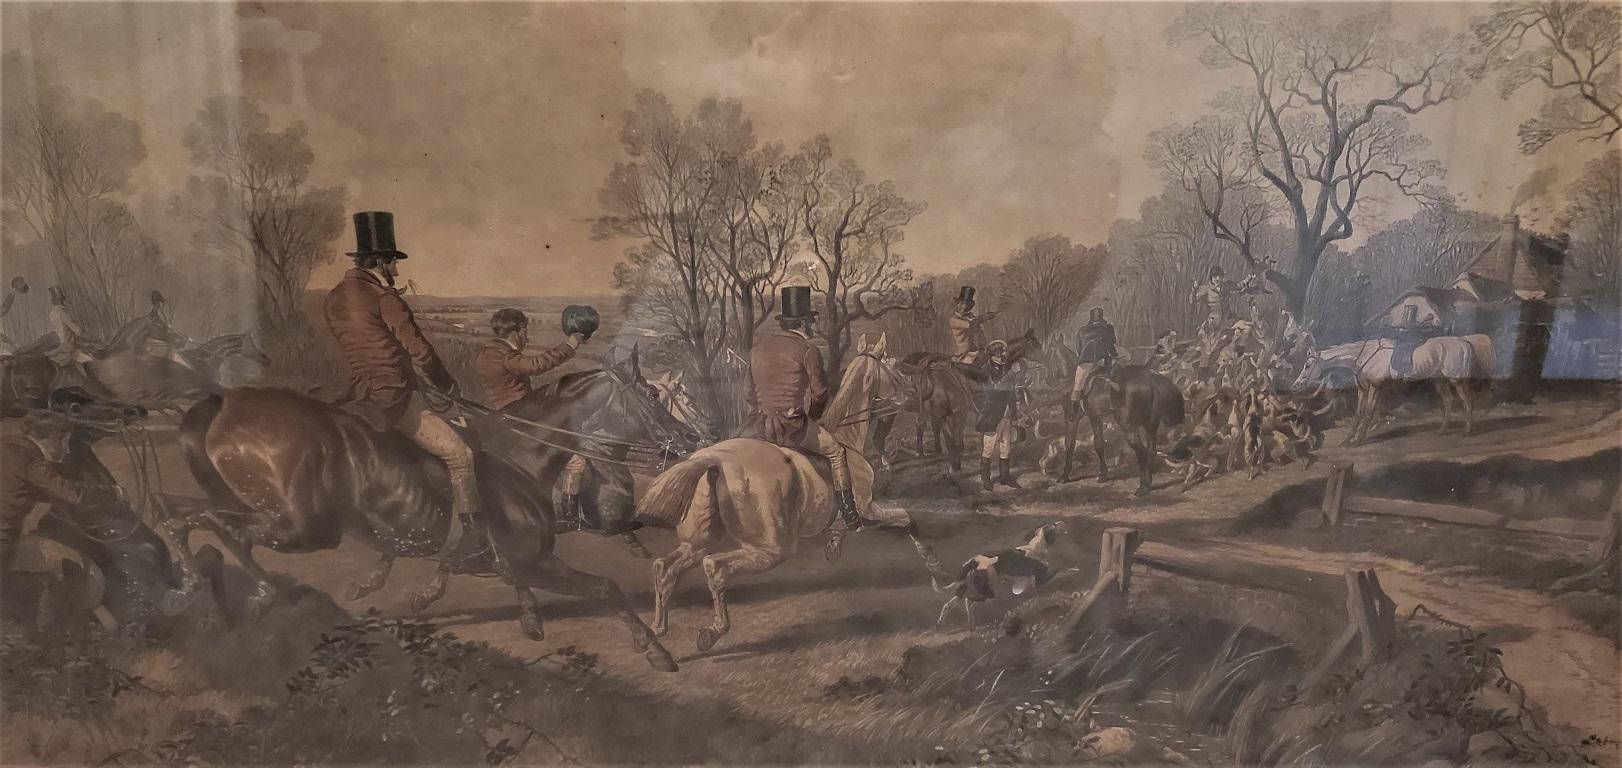 Presenting a fabulous and very rare set of original mid-19th century Chromolithograph Engravings by John Frederick Herring Snr from circa 1850.

The exciting action of the hunt is captured in this attractive set of four engravings of paintings by